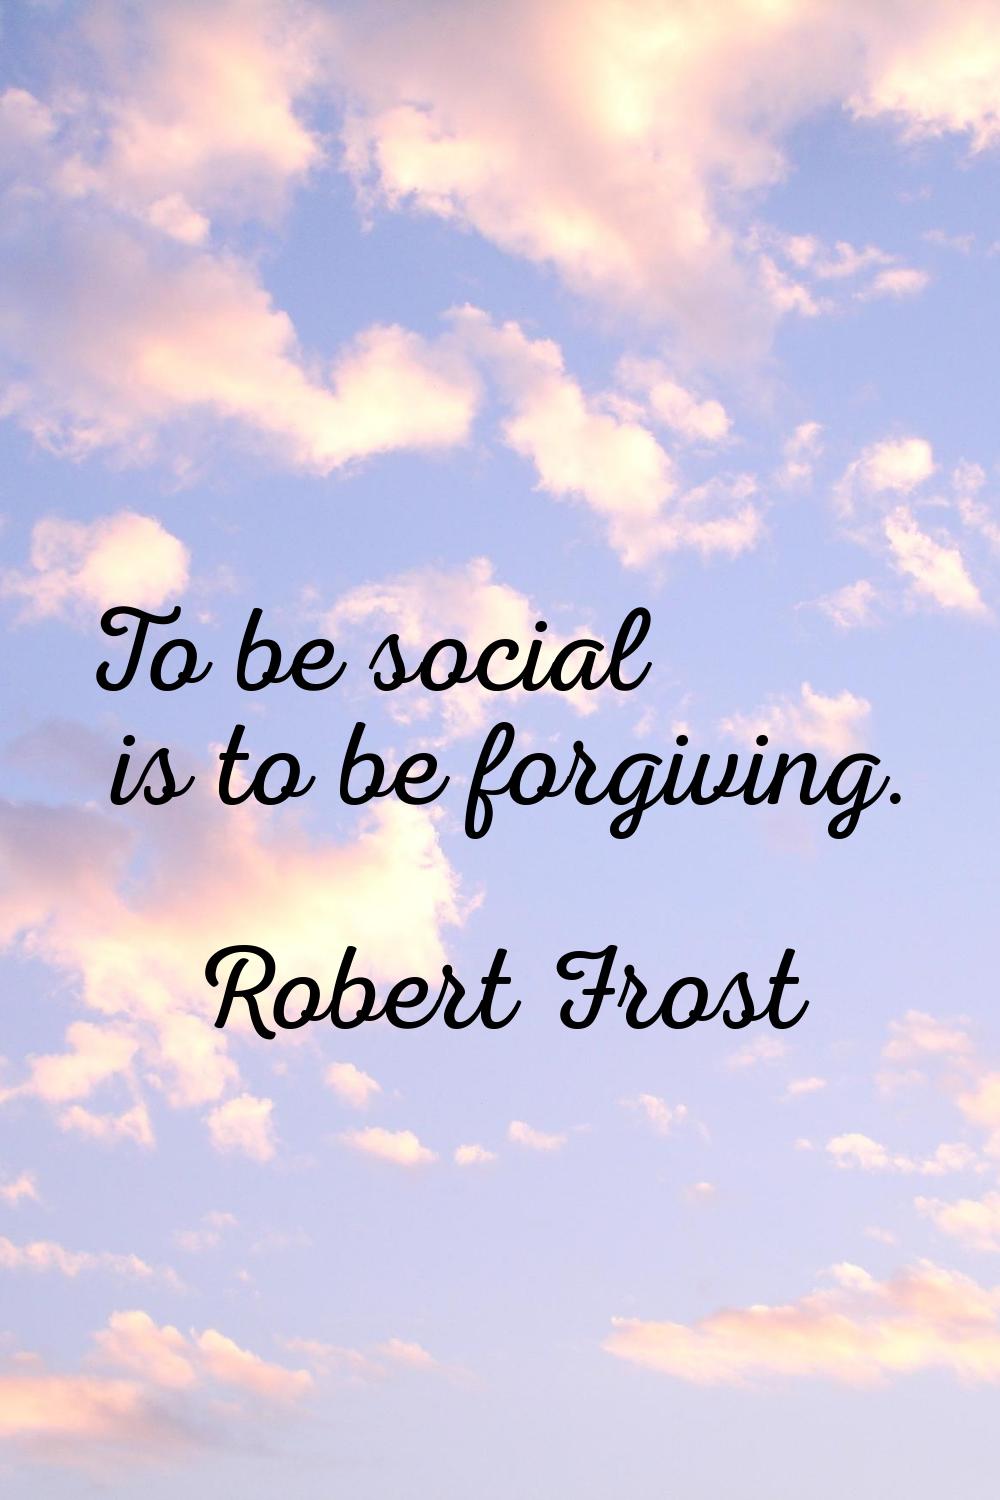 To be social is to be forgiving.